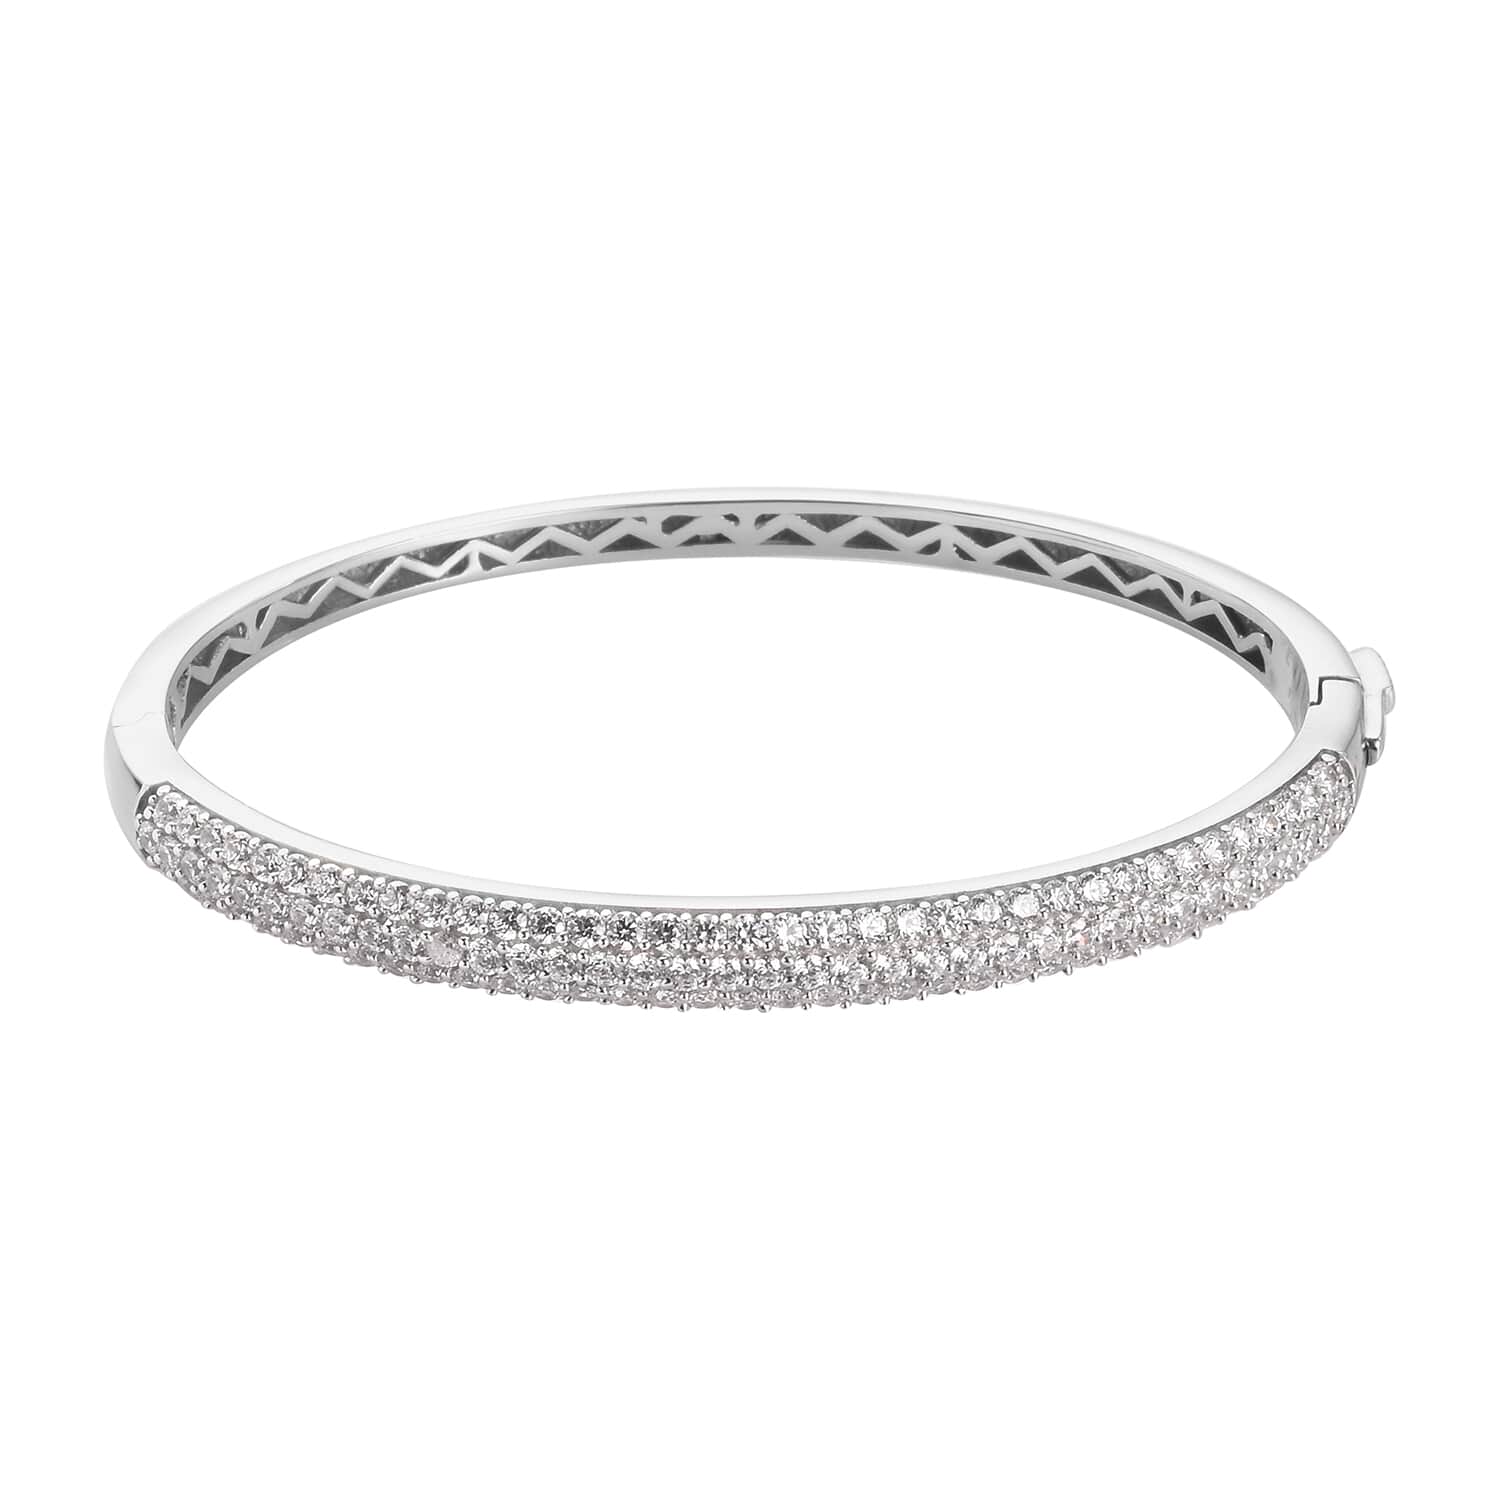 Lustro Stella Made with Finest CZ Bangle Bracelet in Platinum Over Sterling  Silver (6.5 in) 17.25 Grams 5.75 ctw